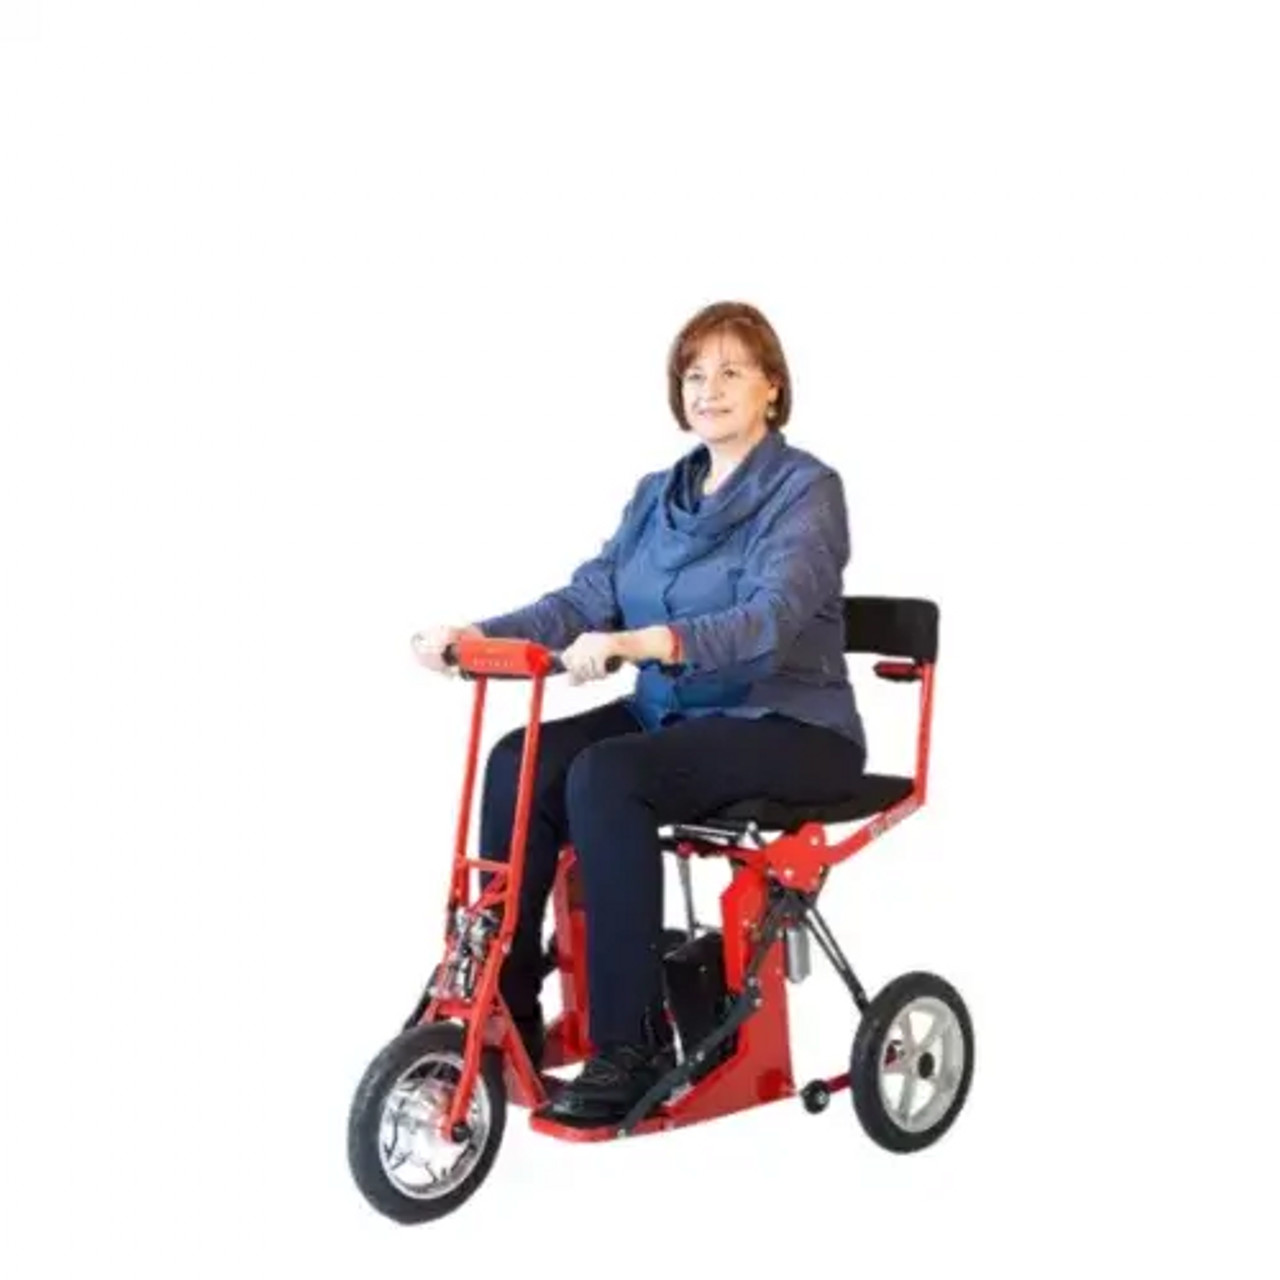 Di Blasi R30 Folding Mobility Scooter - Lightweight, Portable 220 lbs. -Chicken Pieces